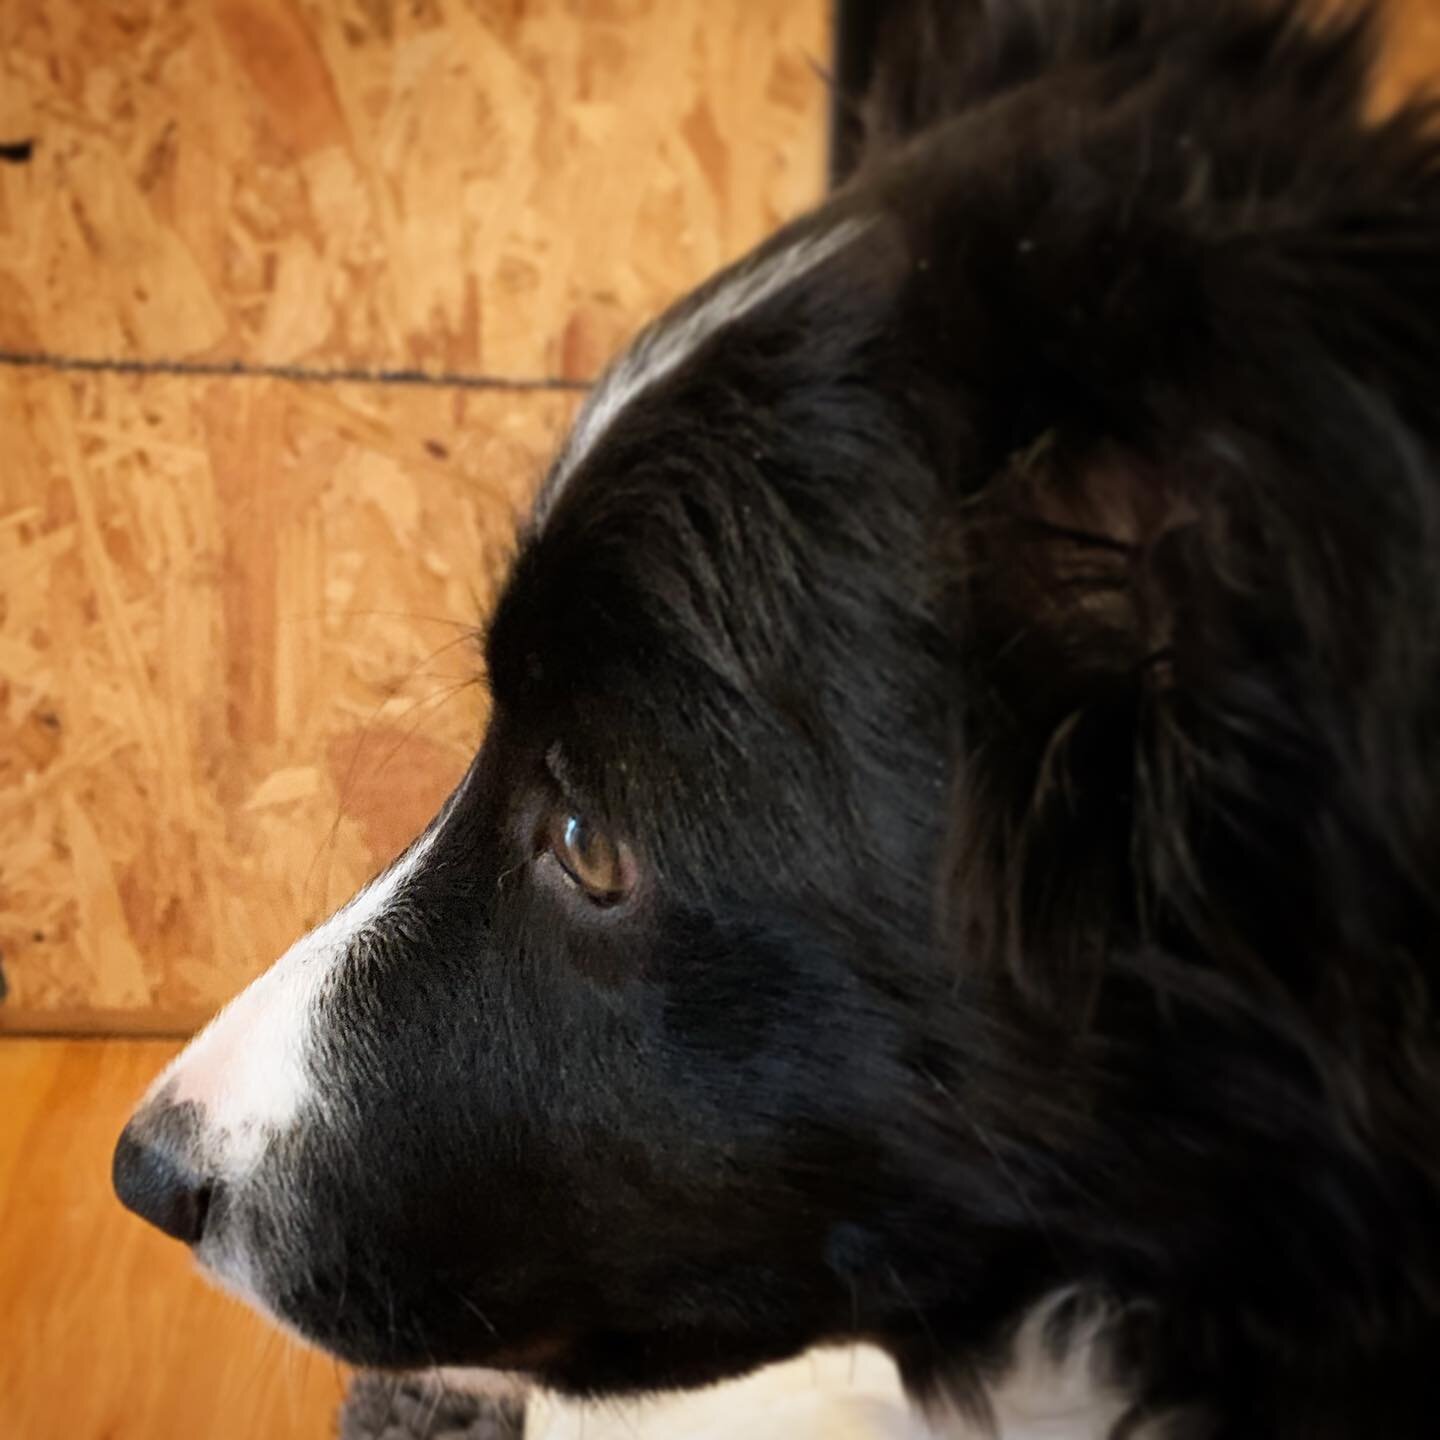 A pensive moment. Luci 4 month old 20lbs. 
#bordercollie #bordercolliesofinstagram #bordercolliepuppy #puppy #puppylove #ボーダーコリー #ボーダーコリーパピー 
#ボーダーコリーのいる生活